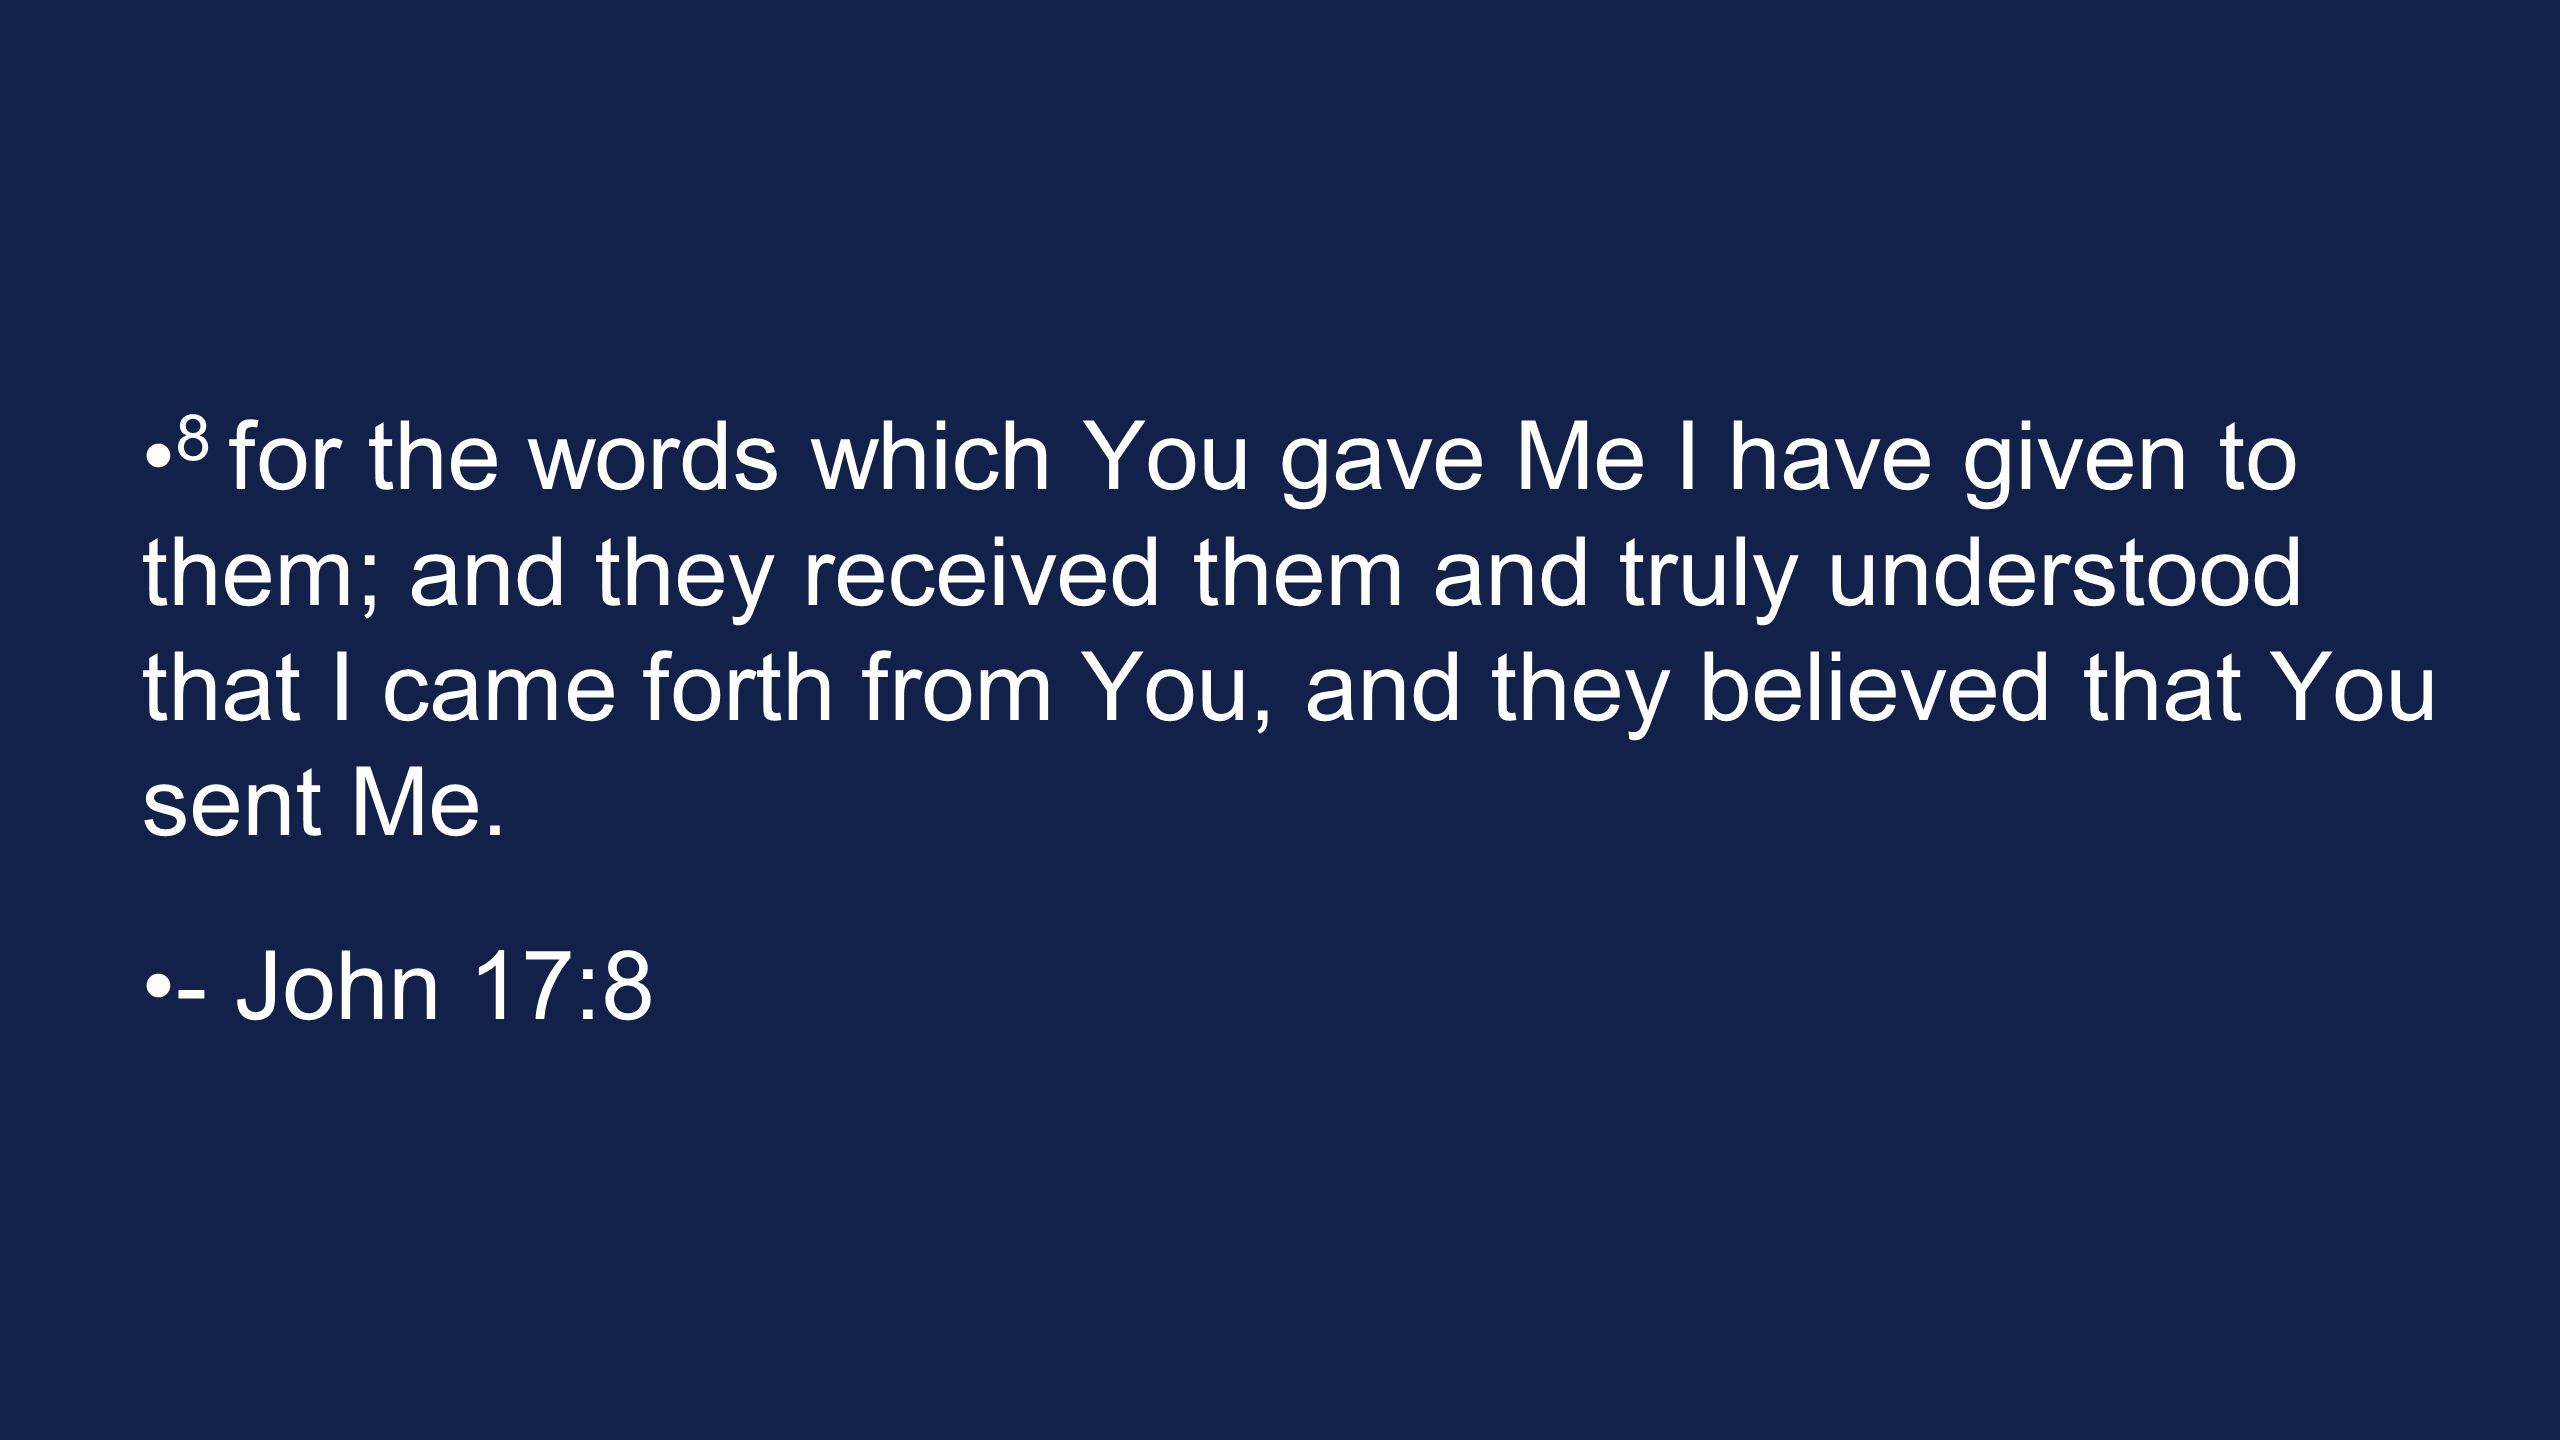 8 for the words which You gave Me I have given to them; and they received them and truly understood that I came forth from You, and they believed that You sent Me.